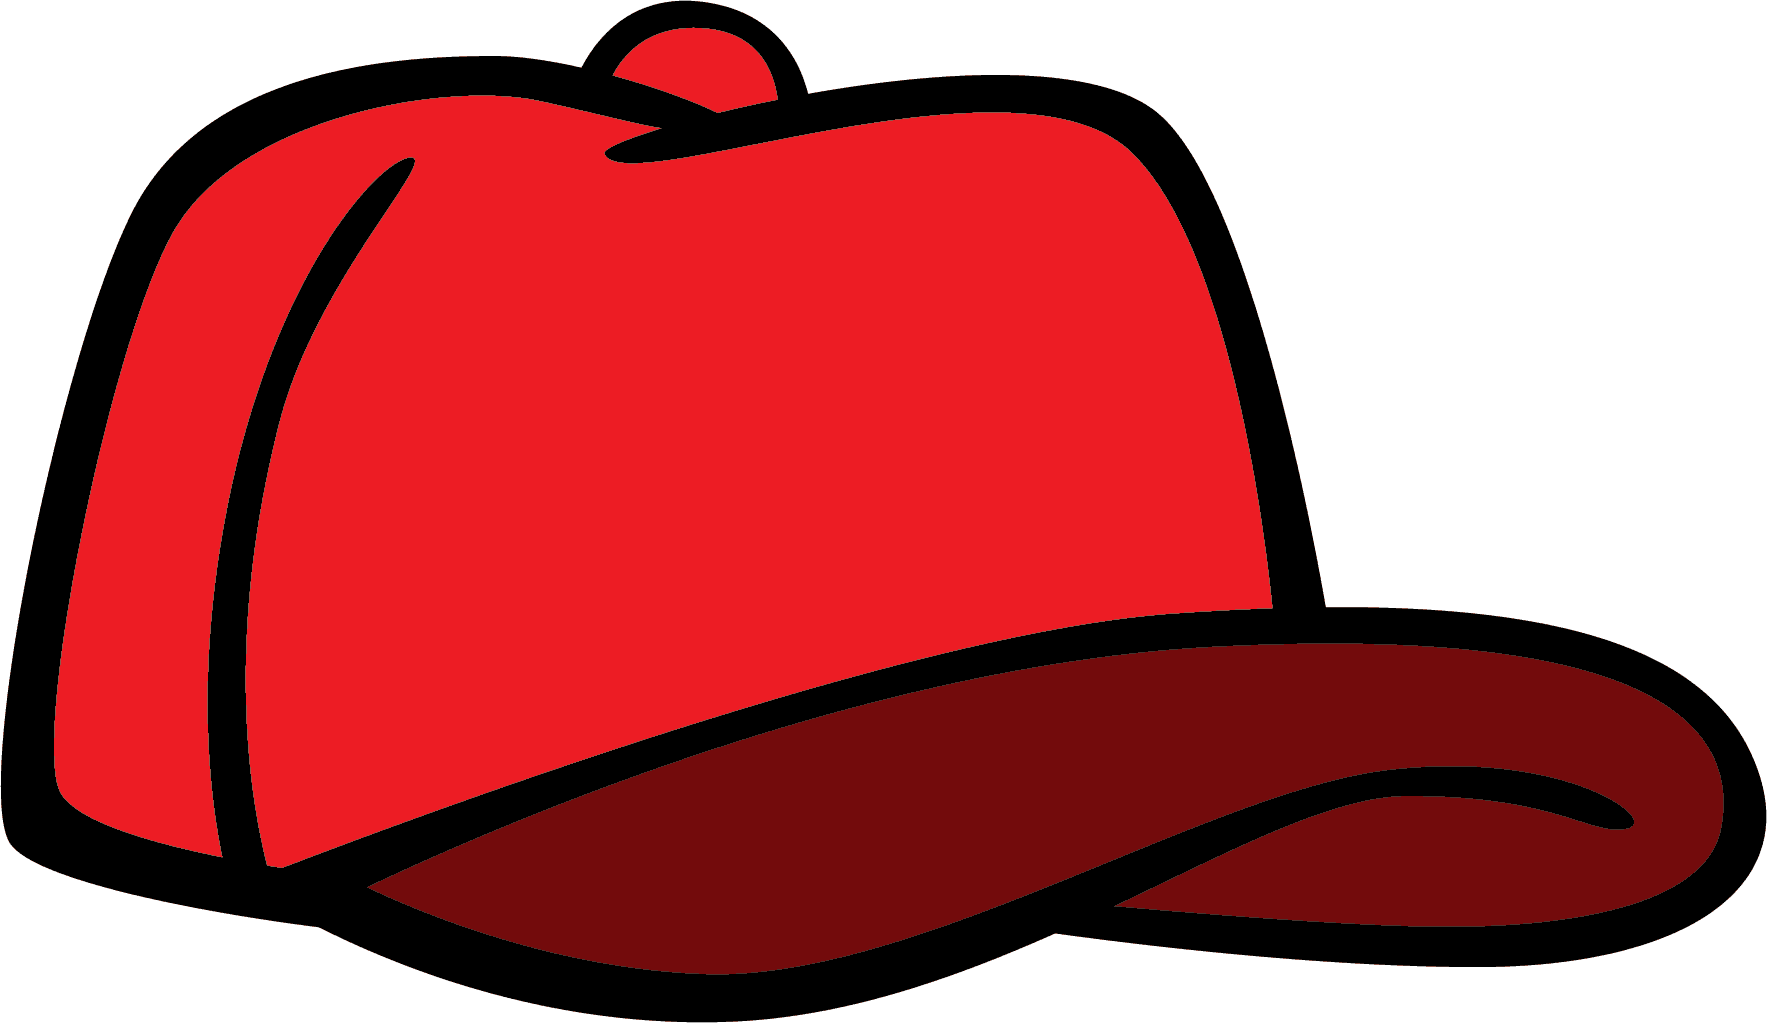 red hat clip art download - photo #24